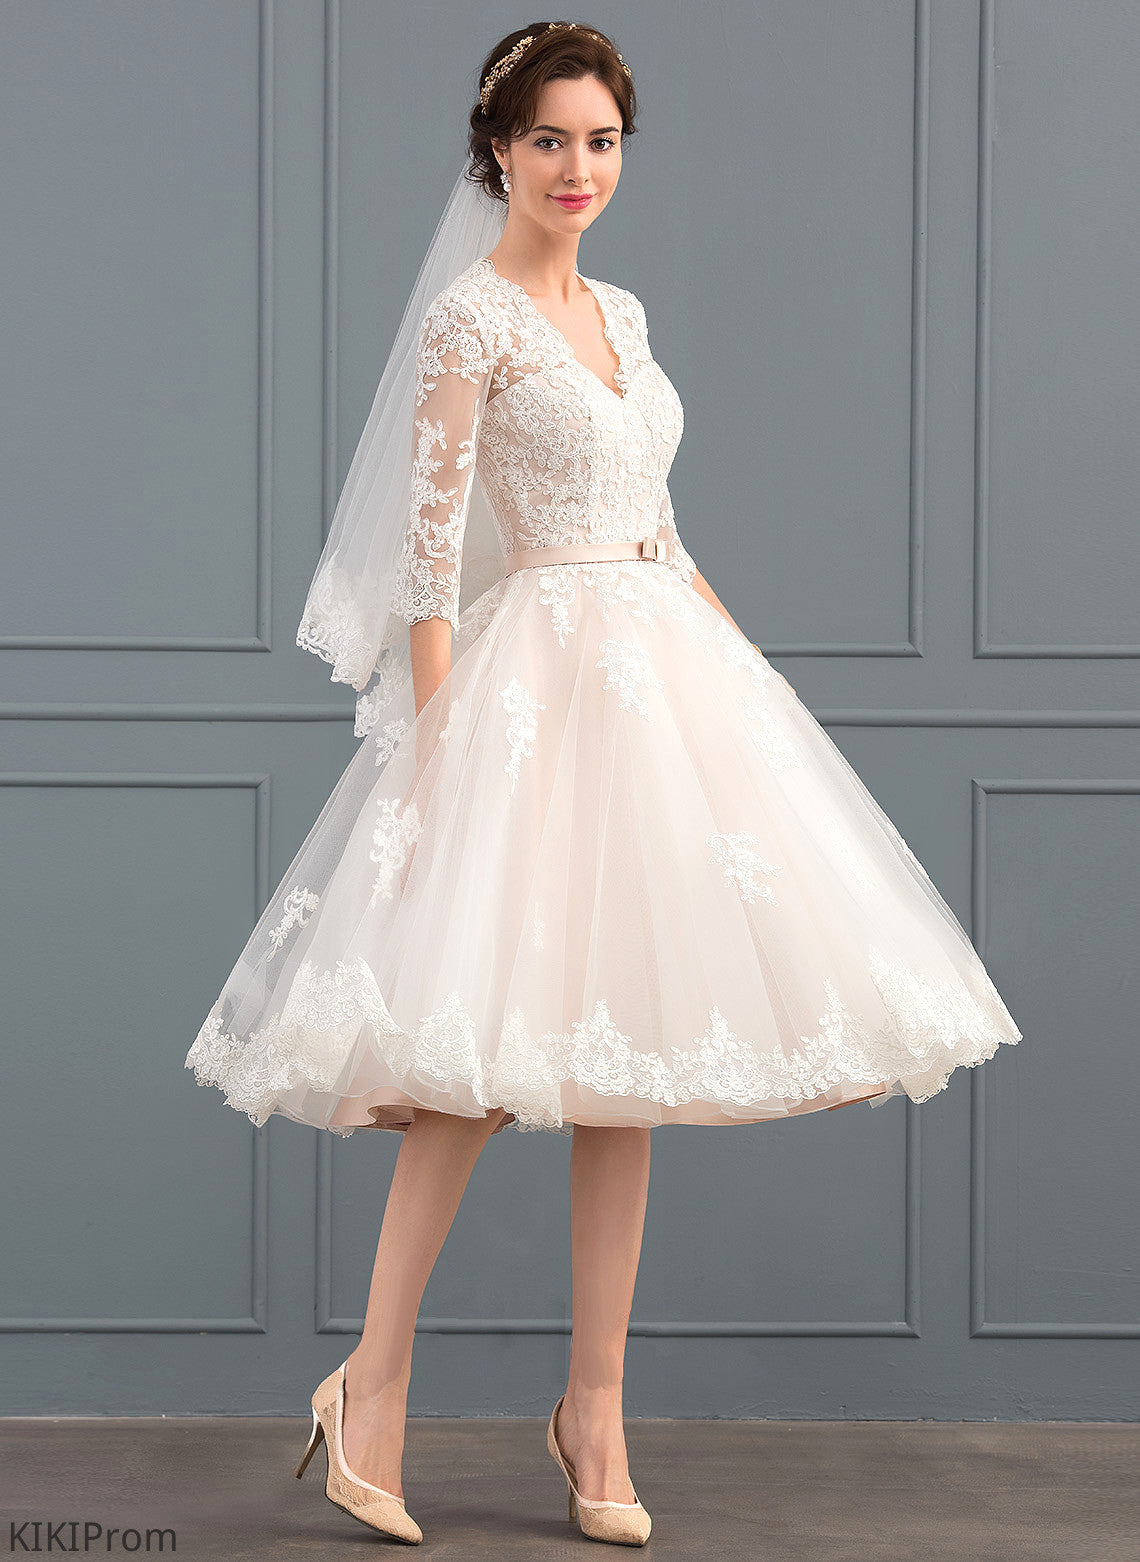 Wedding Bow(s) Knee-Length Wedding Dresses A-Line Abbigail Tulle Dress V-neck With